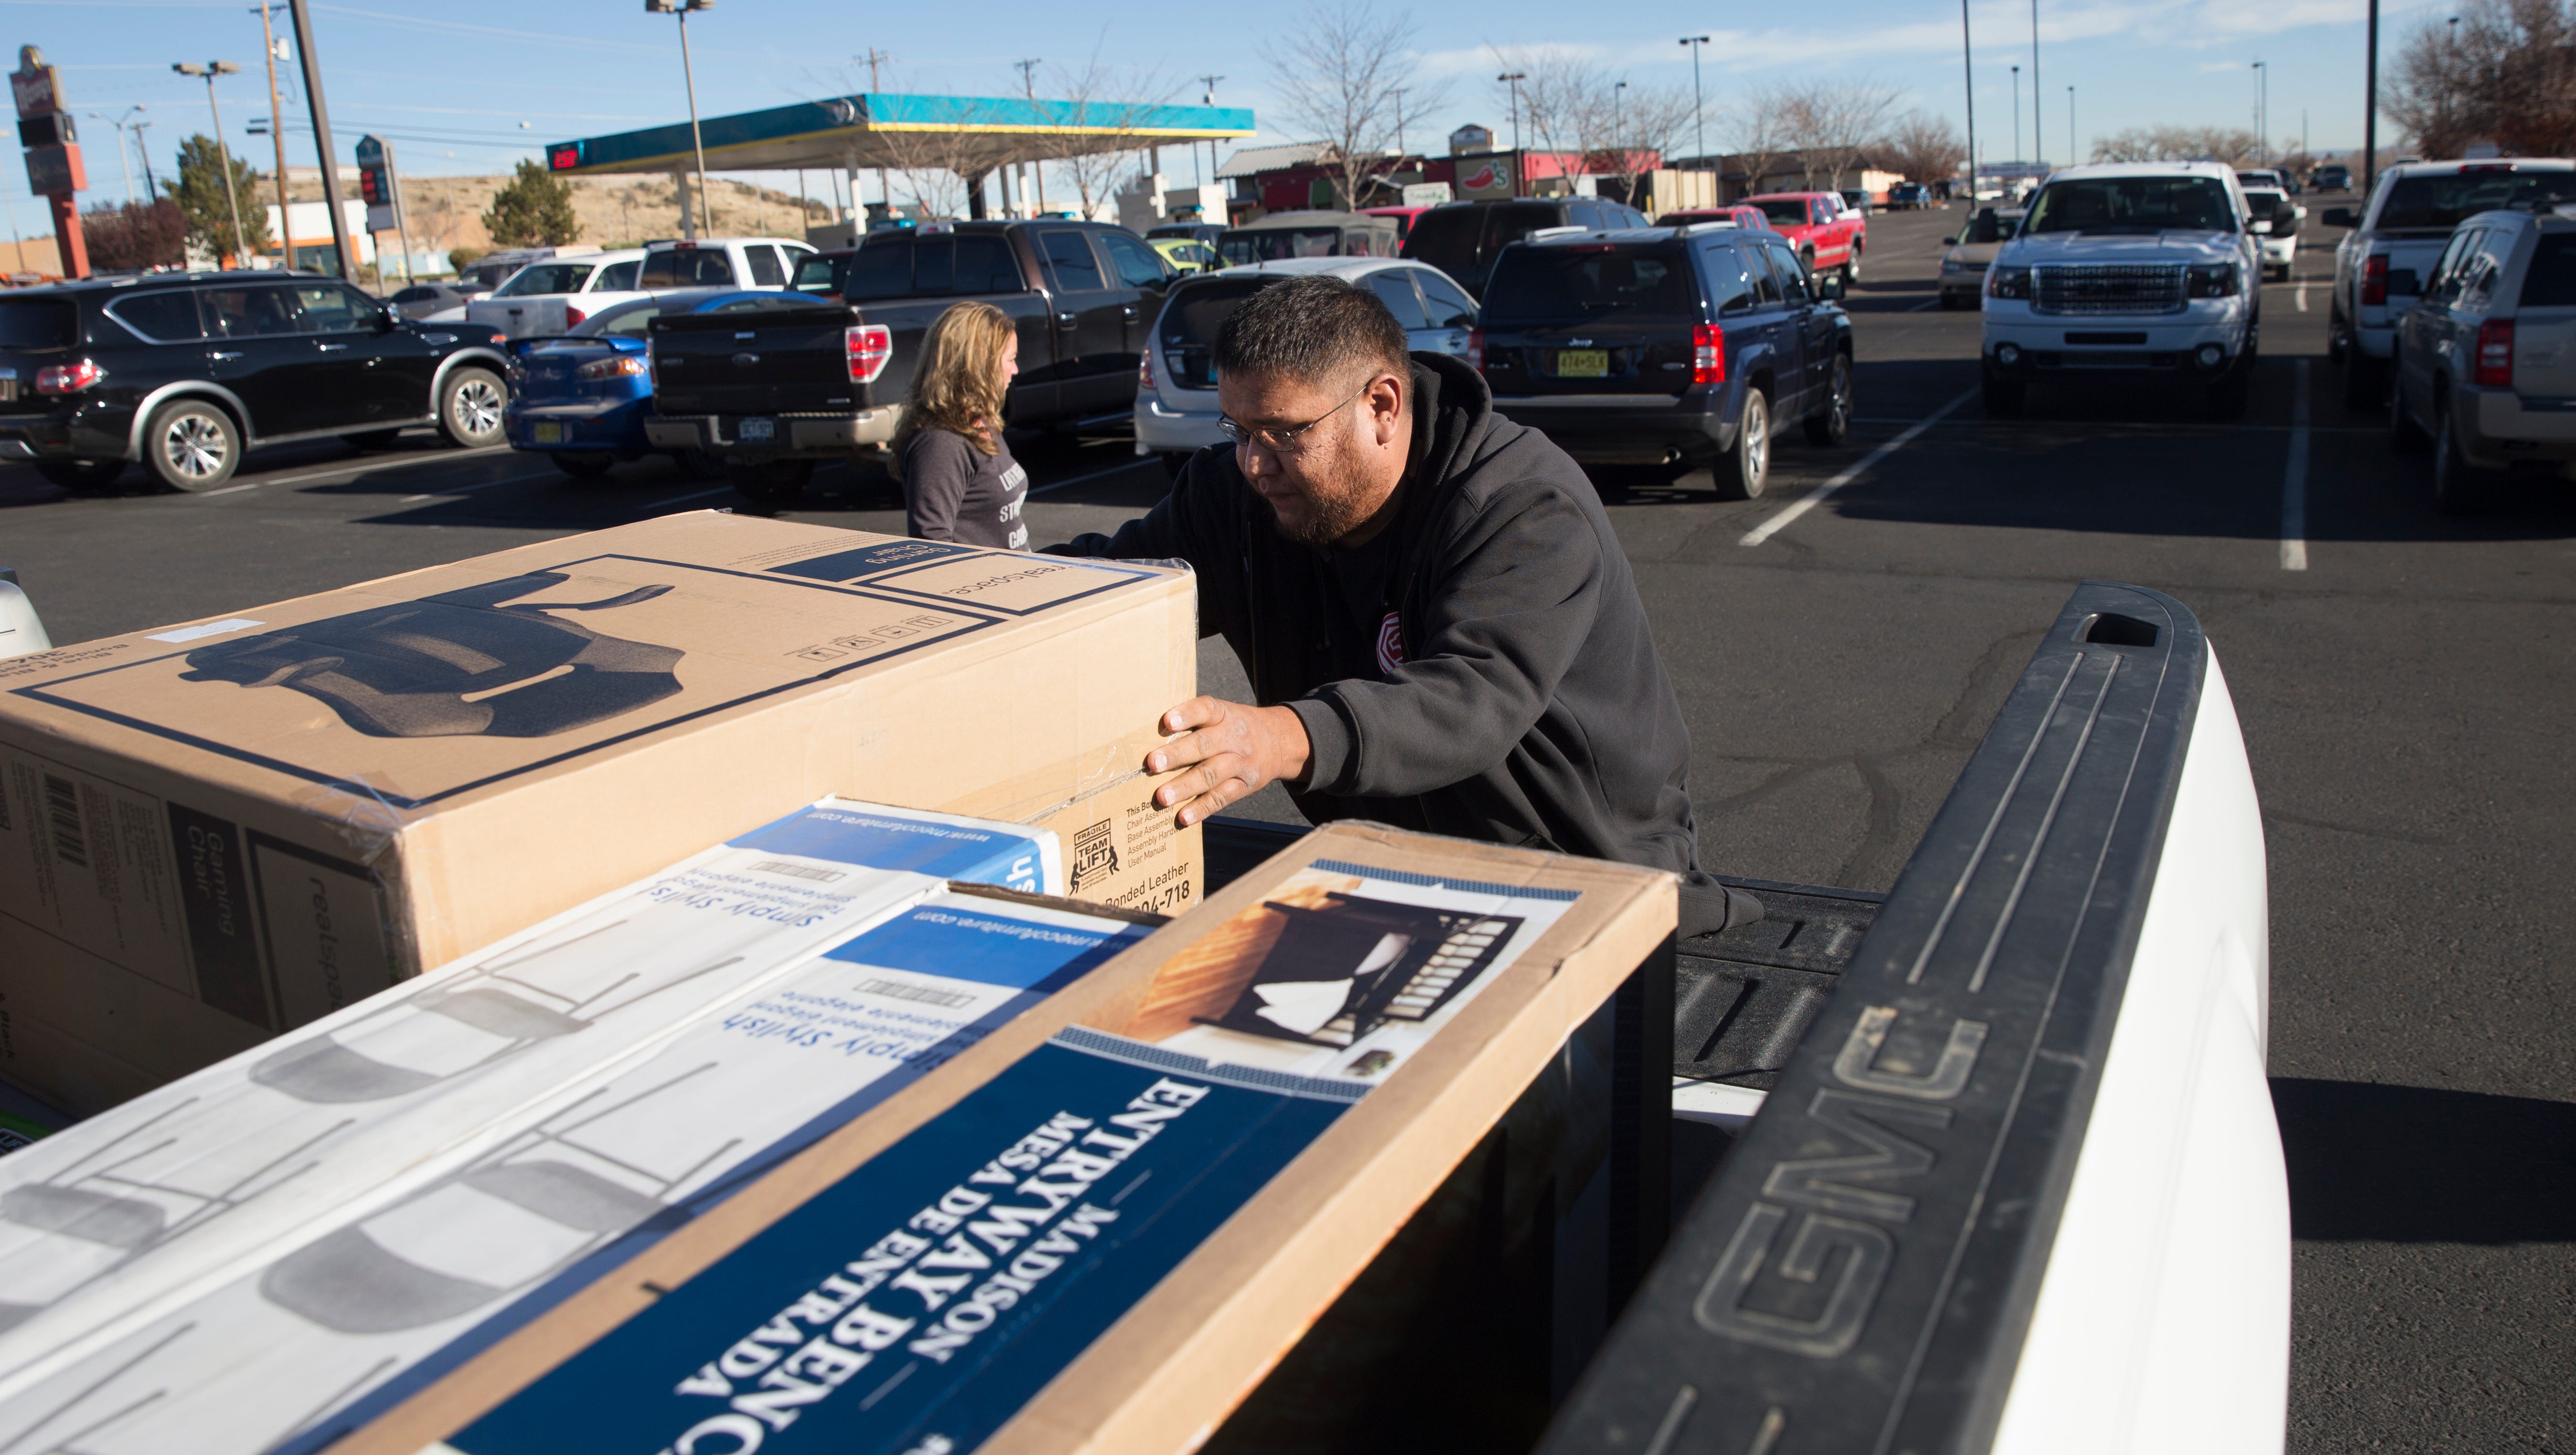 Shopper Loren Harrison loads his purchases into his vehicle Friday at the Four Corners Marketplace in Farmington.